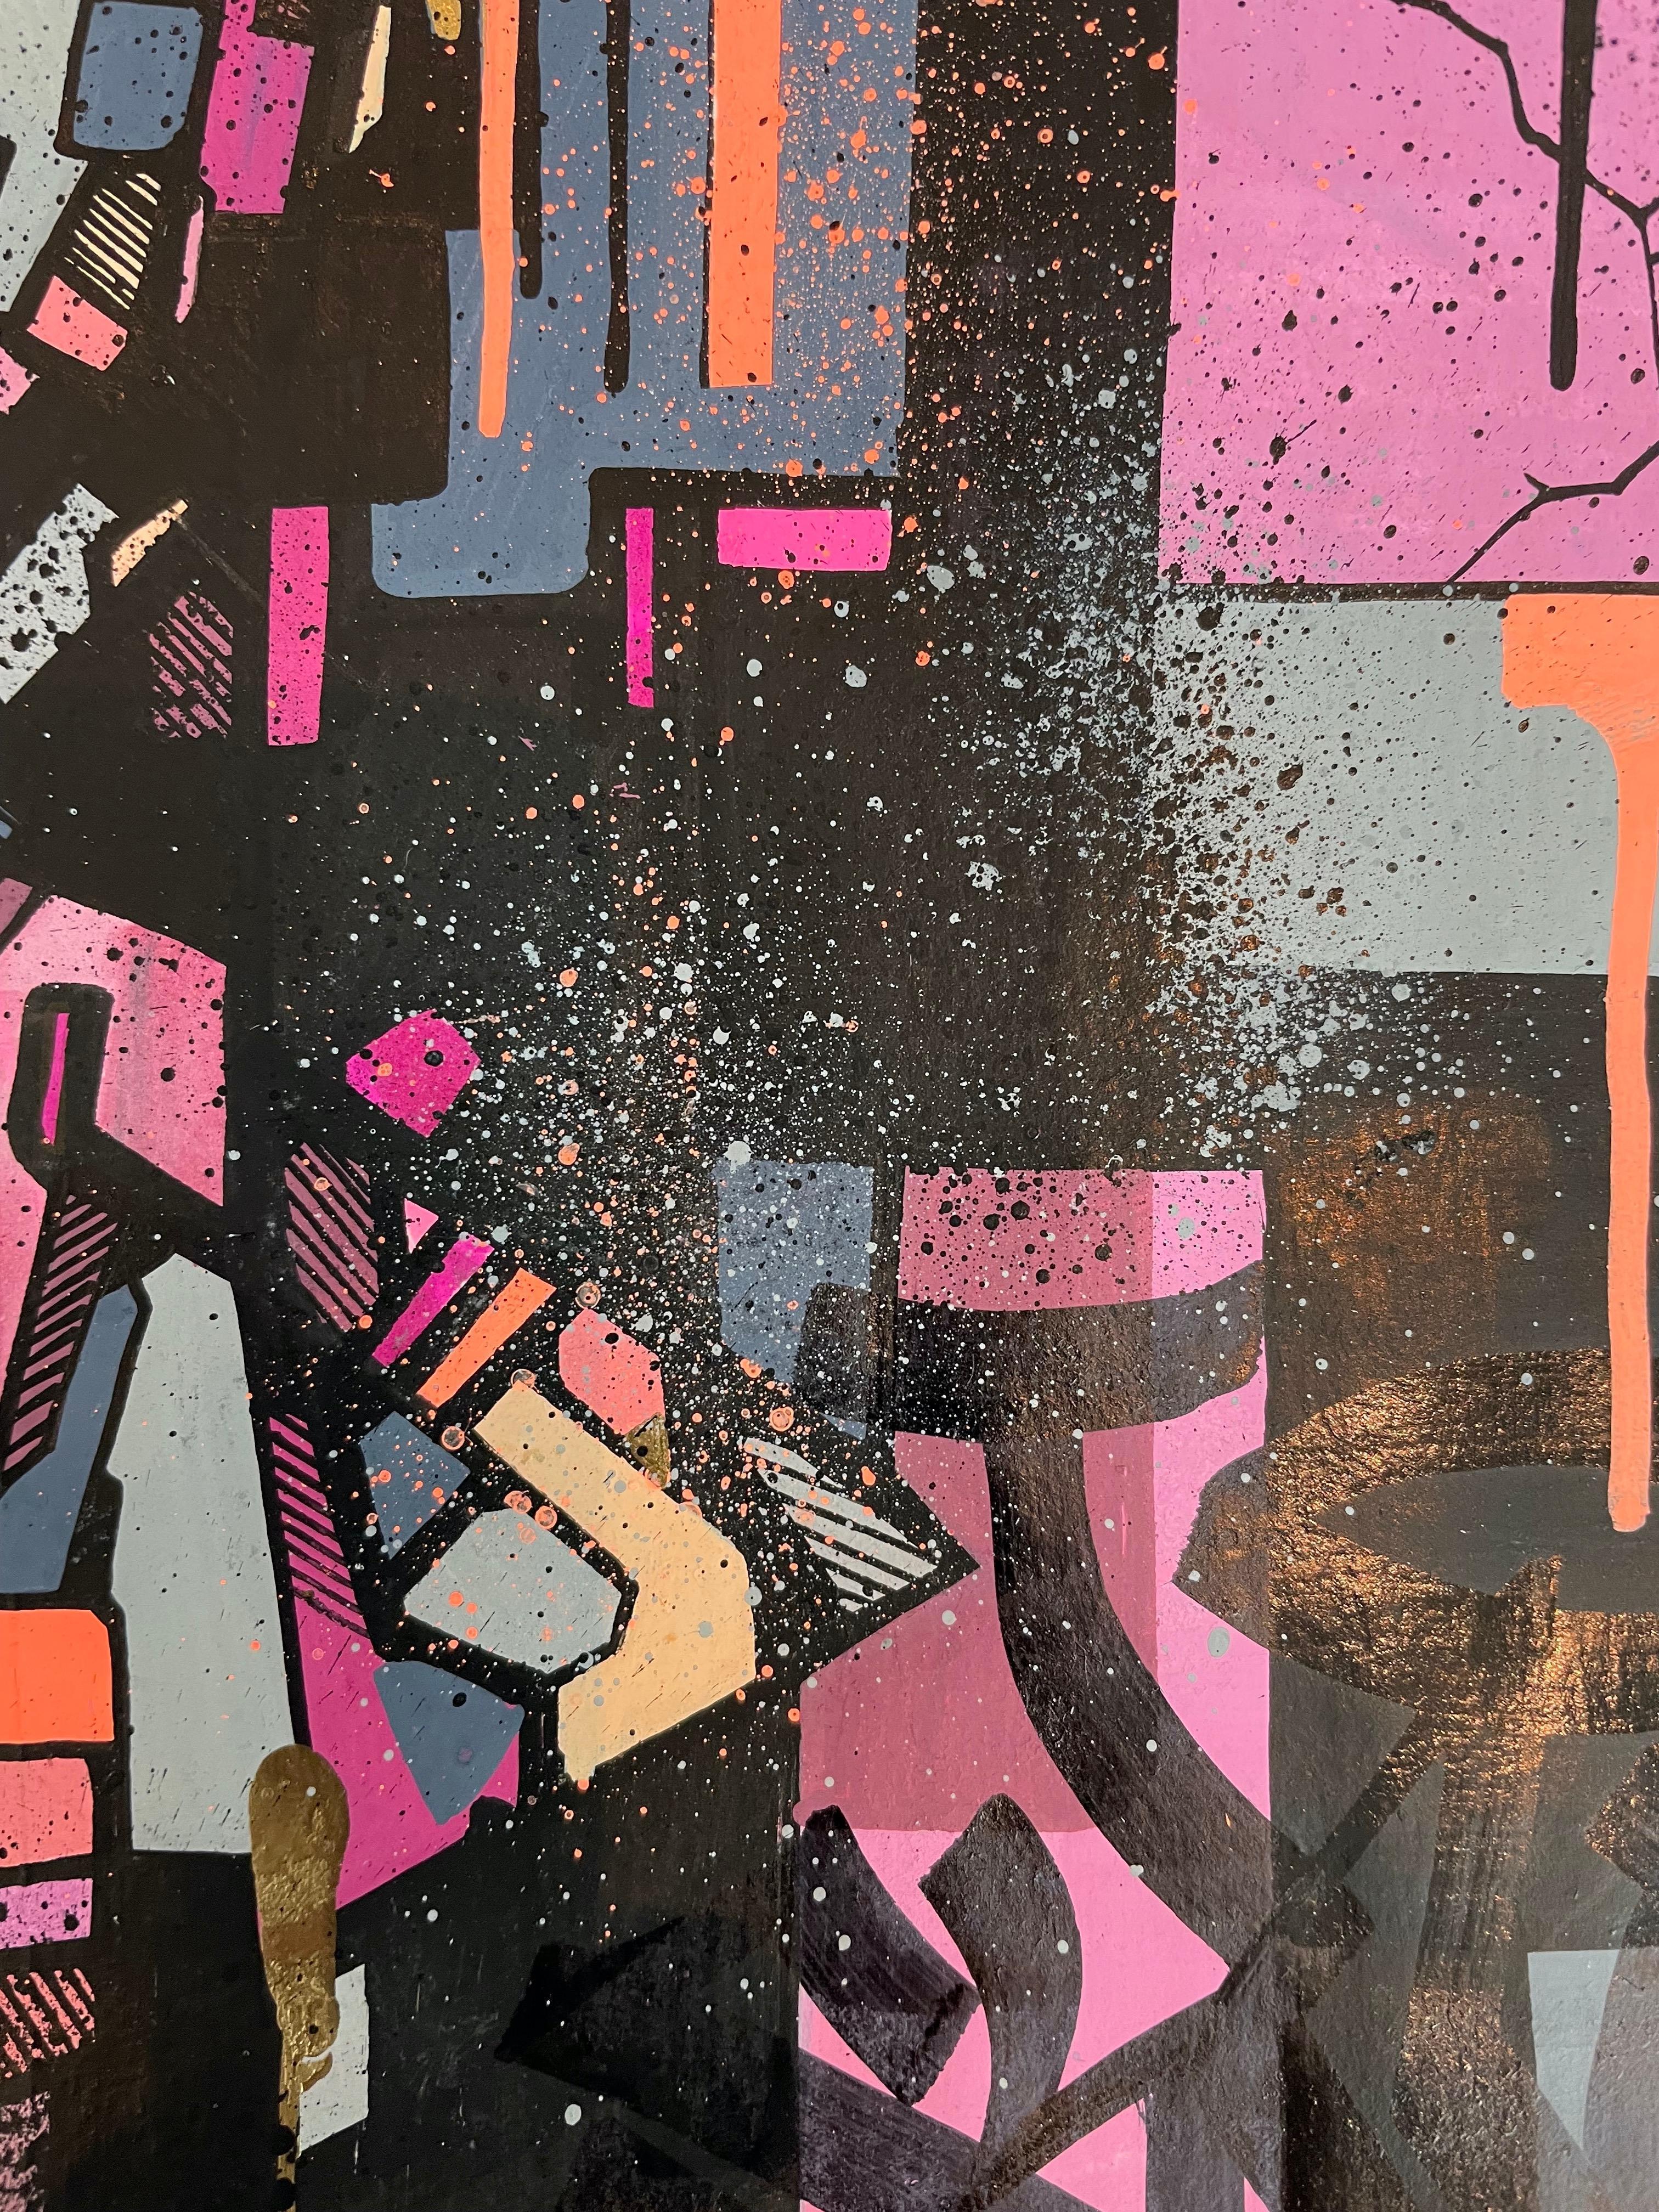 PIECING IT TOGETHER;  Small colorful graffiti art on paper - Painting by Ian Sullivan